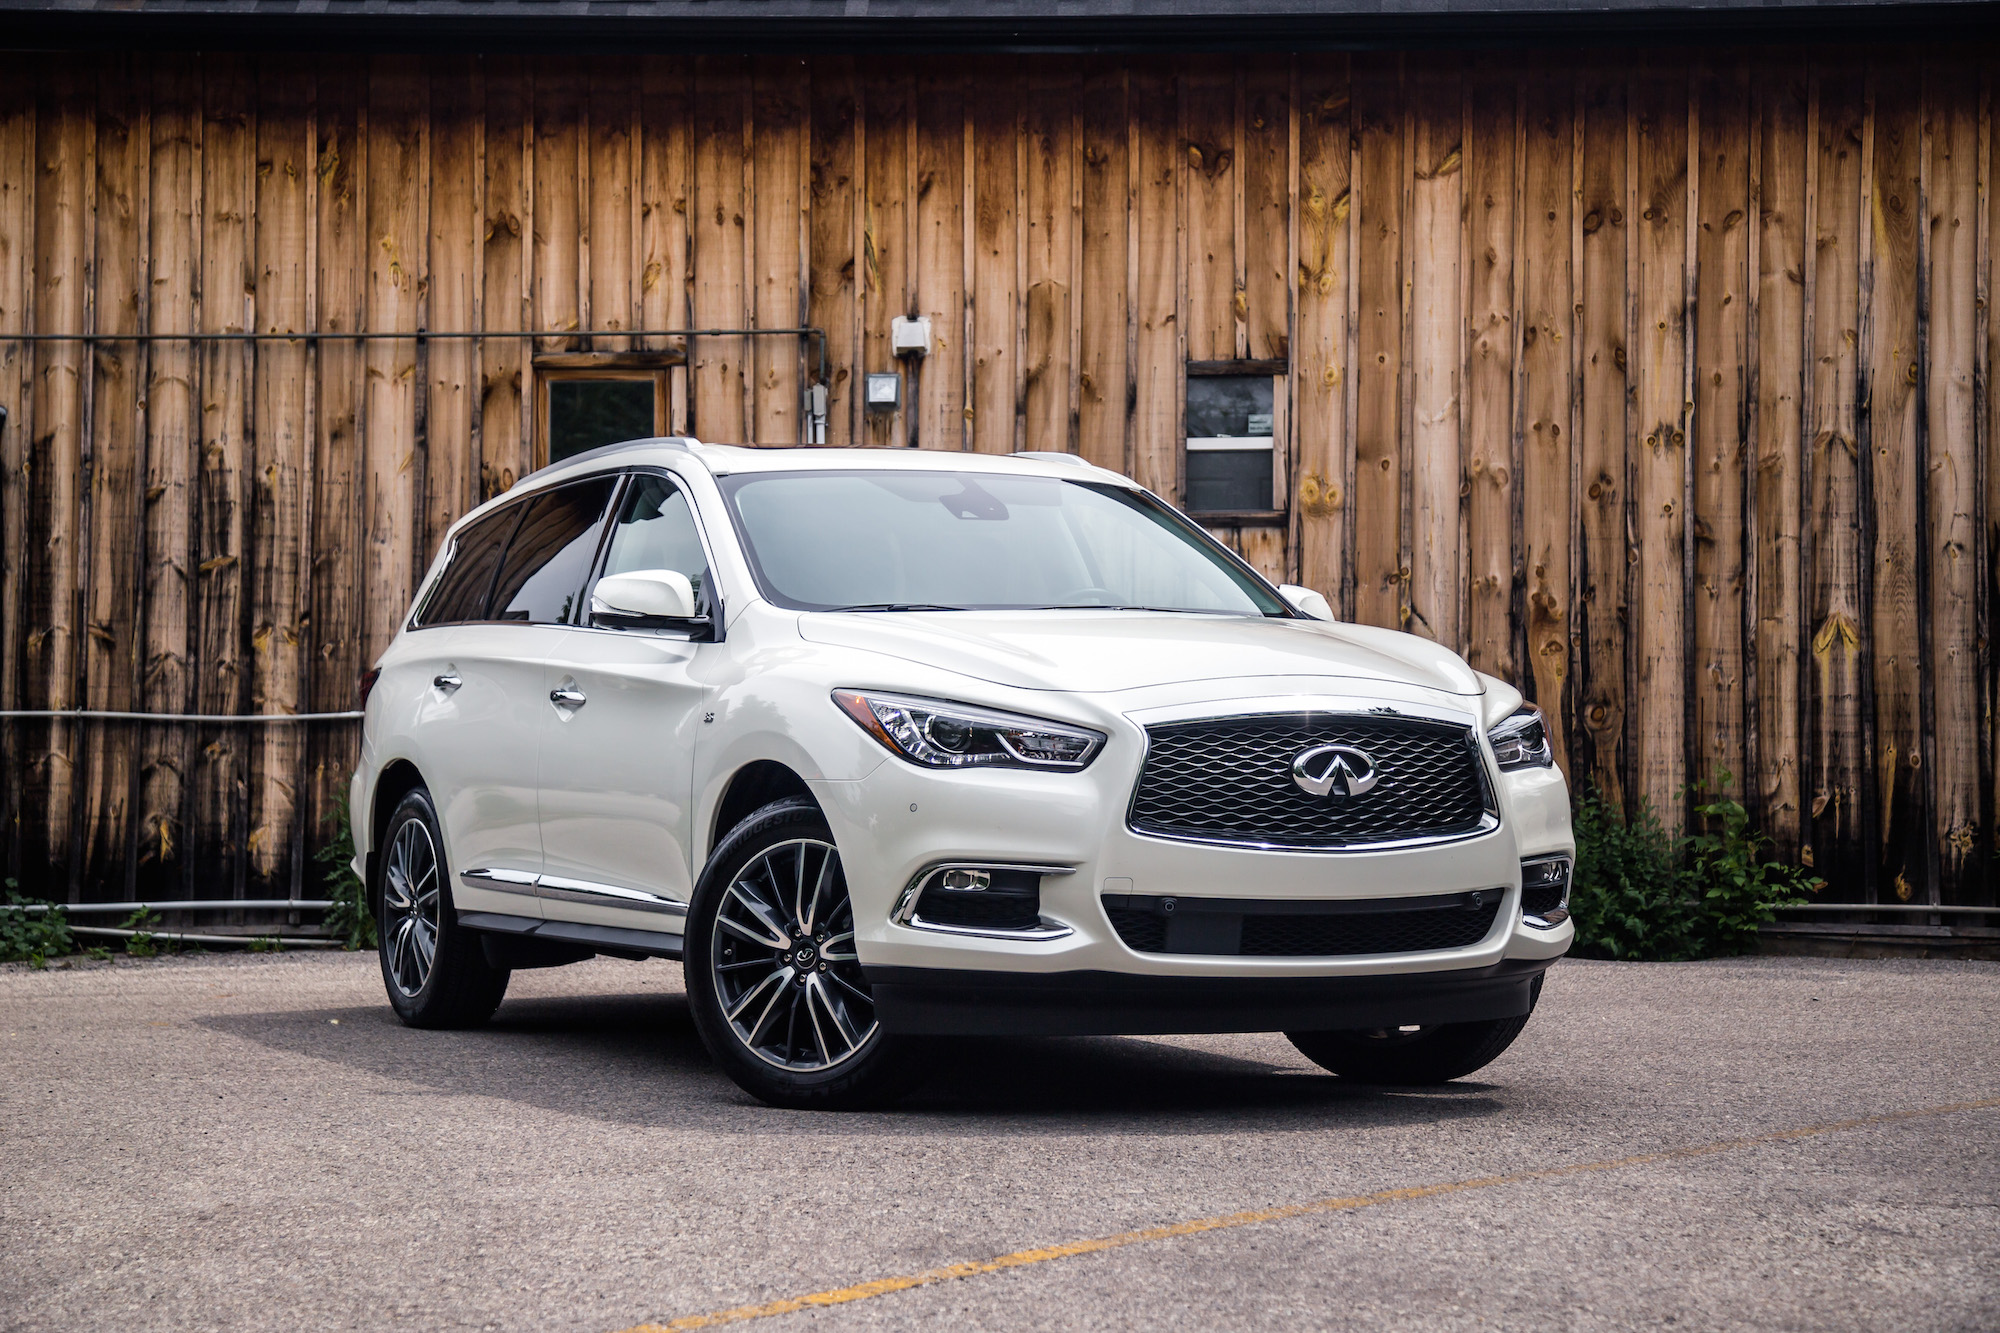 Review: 2017 Infiniti QX60 | Canadian Auto Review